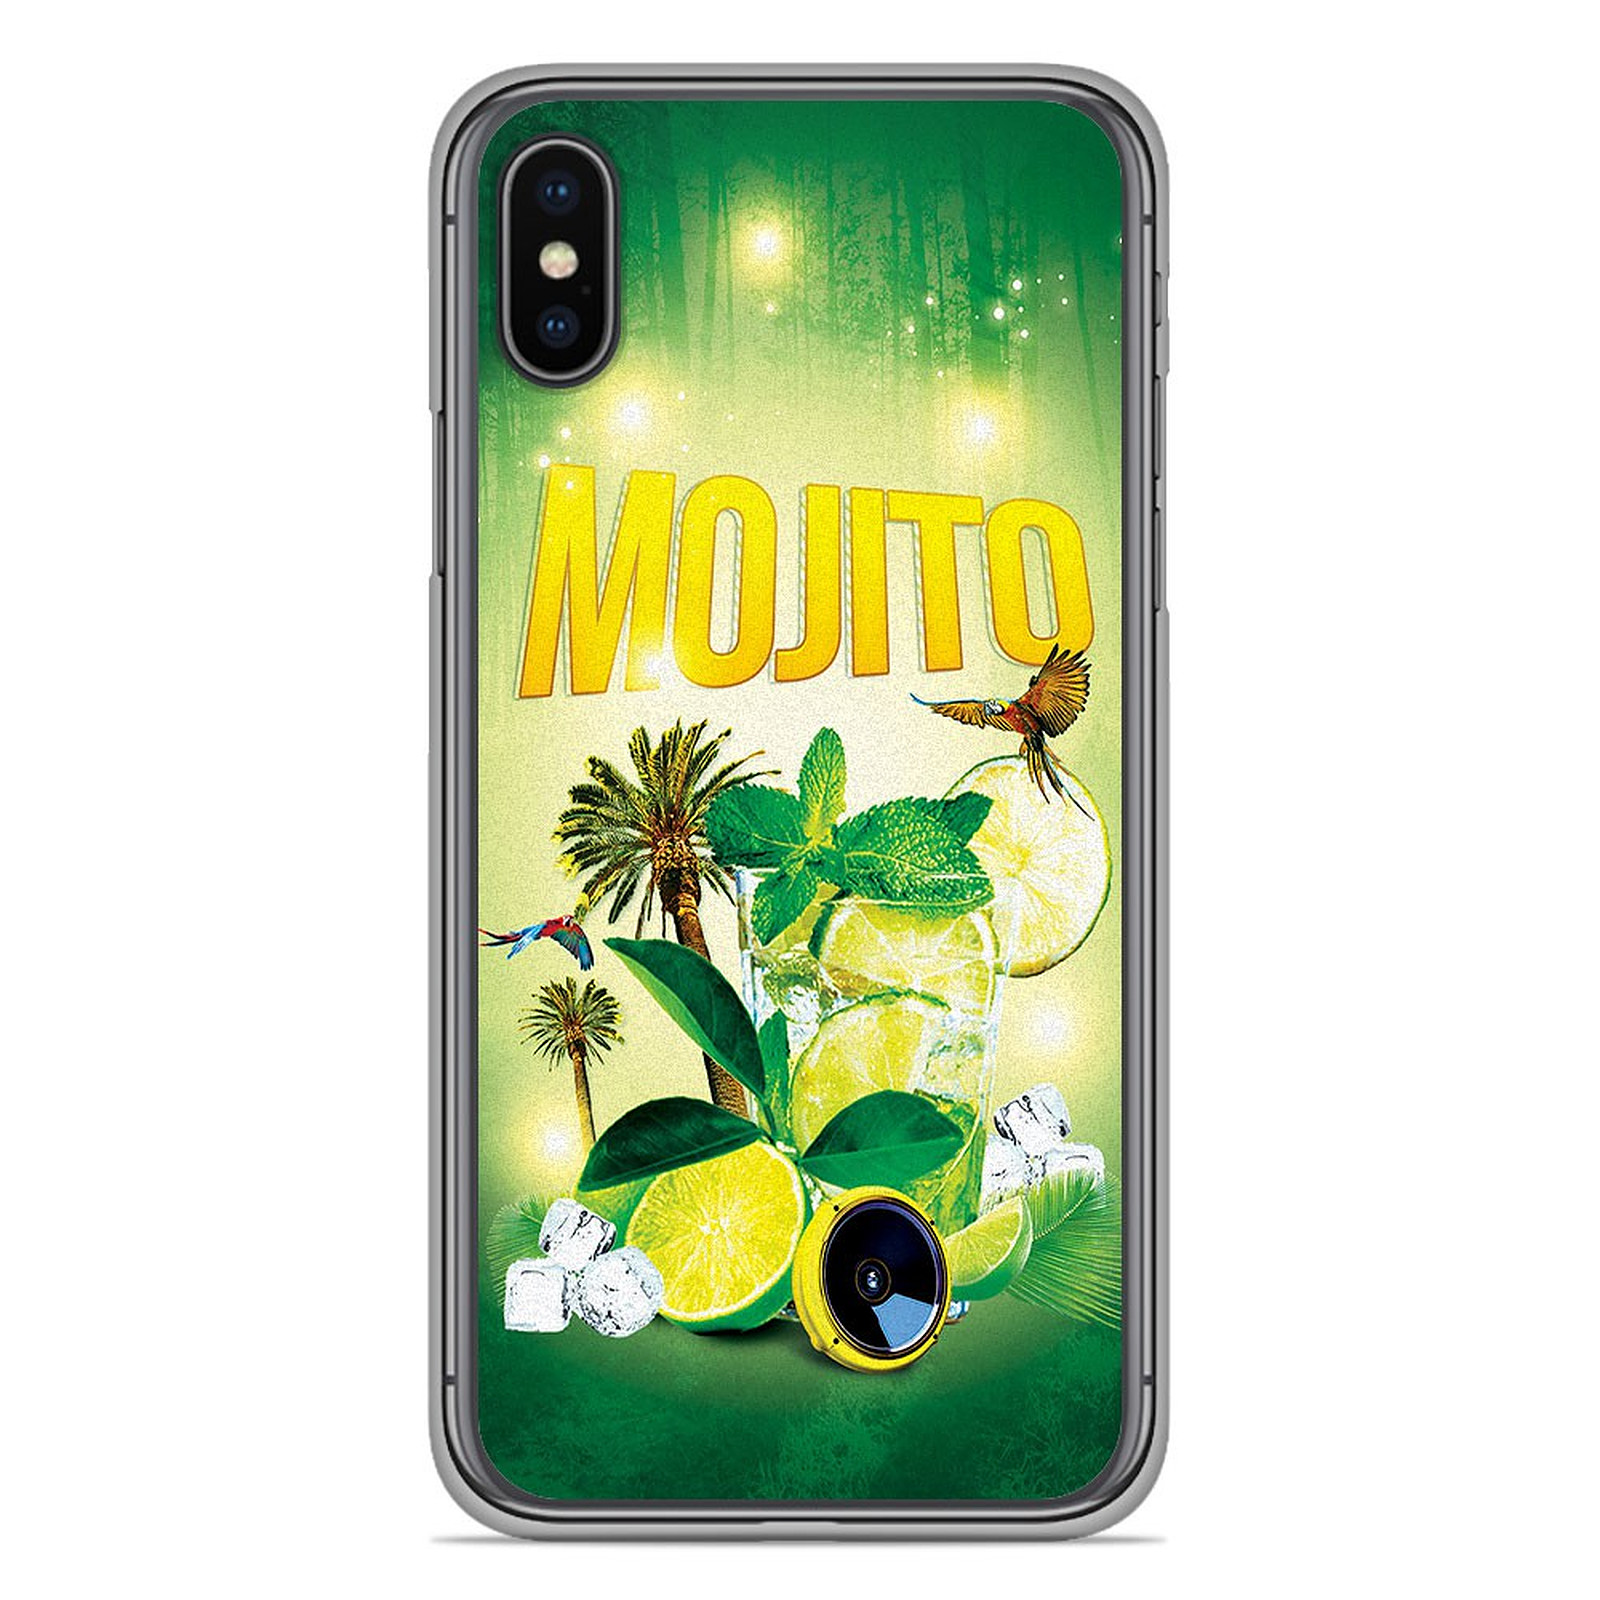 1001 Coques Coque silicone gel Apple iPhone X / XS motif Mojito Foret - Coque telephone 1001Coques